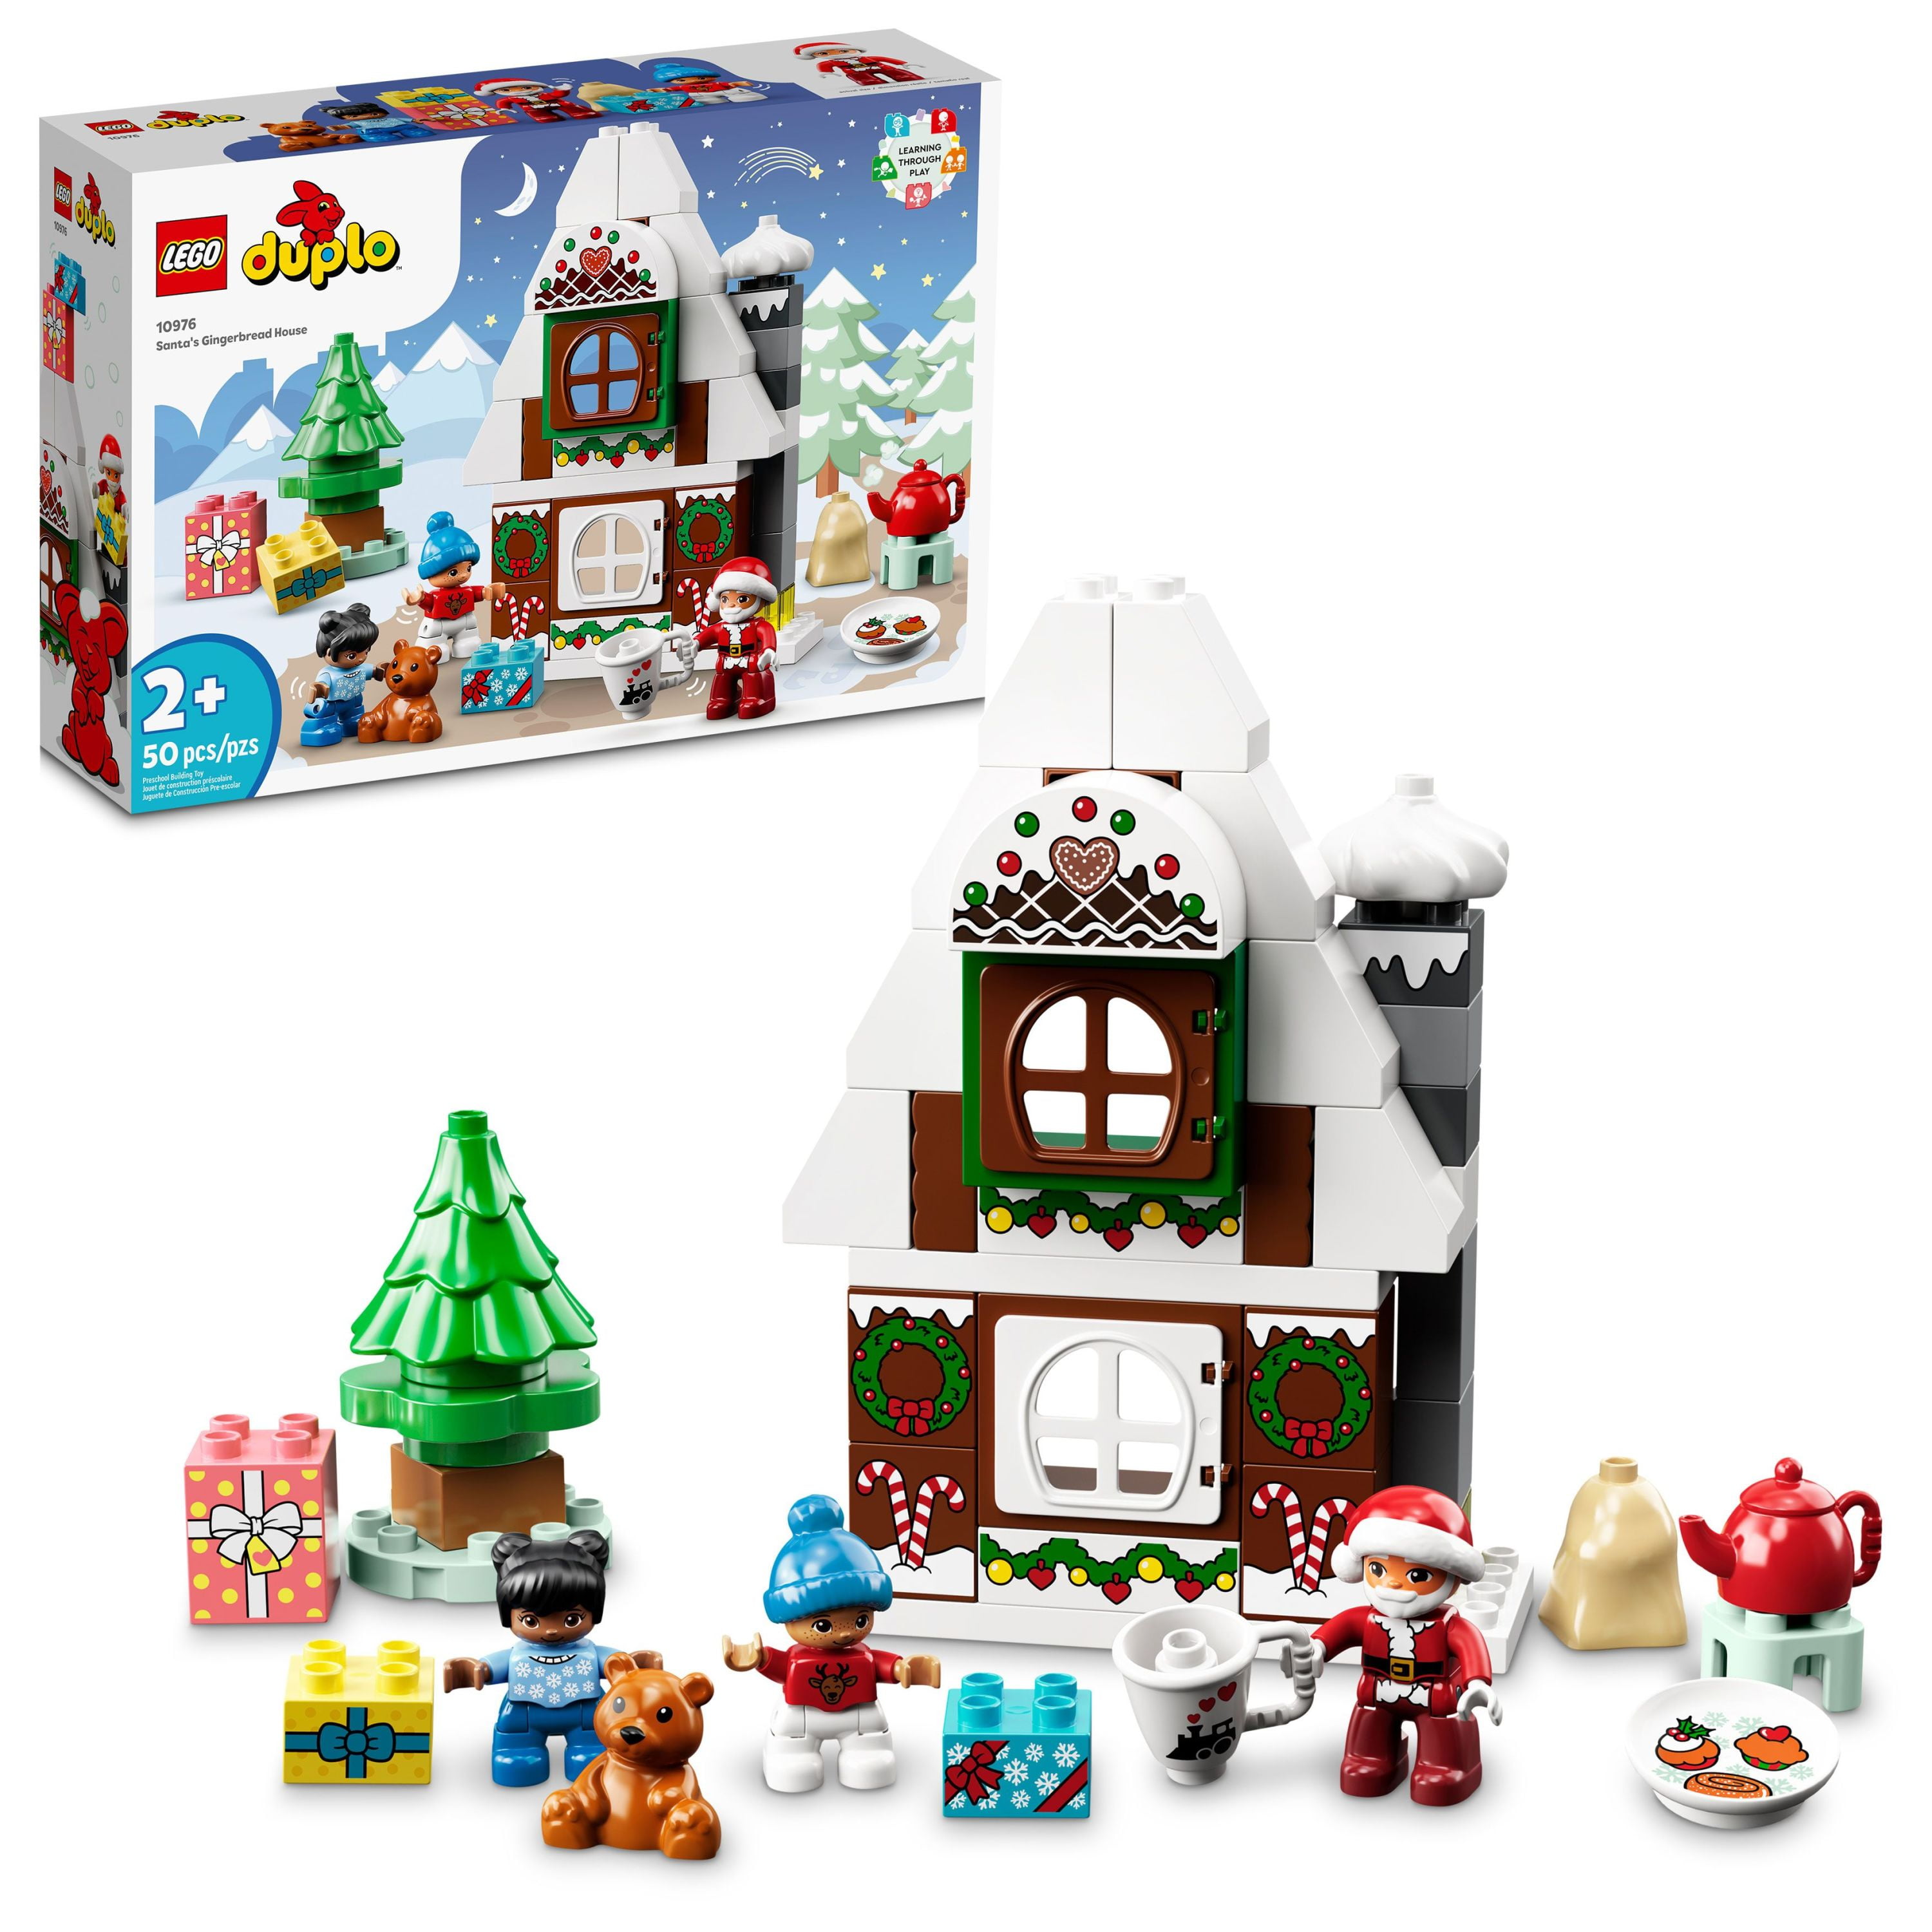 plug Beide pil LEGO DUPLO Santa's Gingerbread House 10976 Toy with Santa Claus Figure,  Christmas Present, Stocking Filler Gift Idea for Toddlers, Girls and Boys  Age 2 Plus - Walmart.com